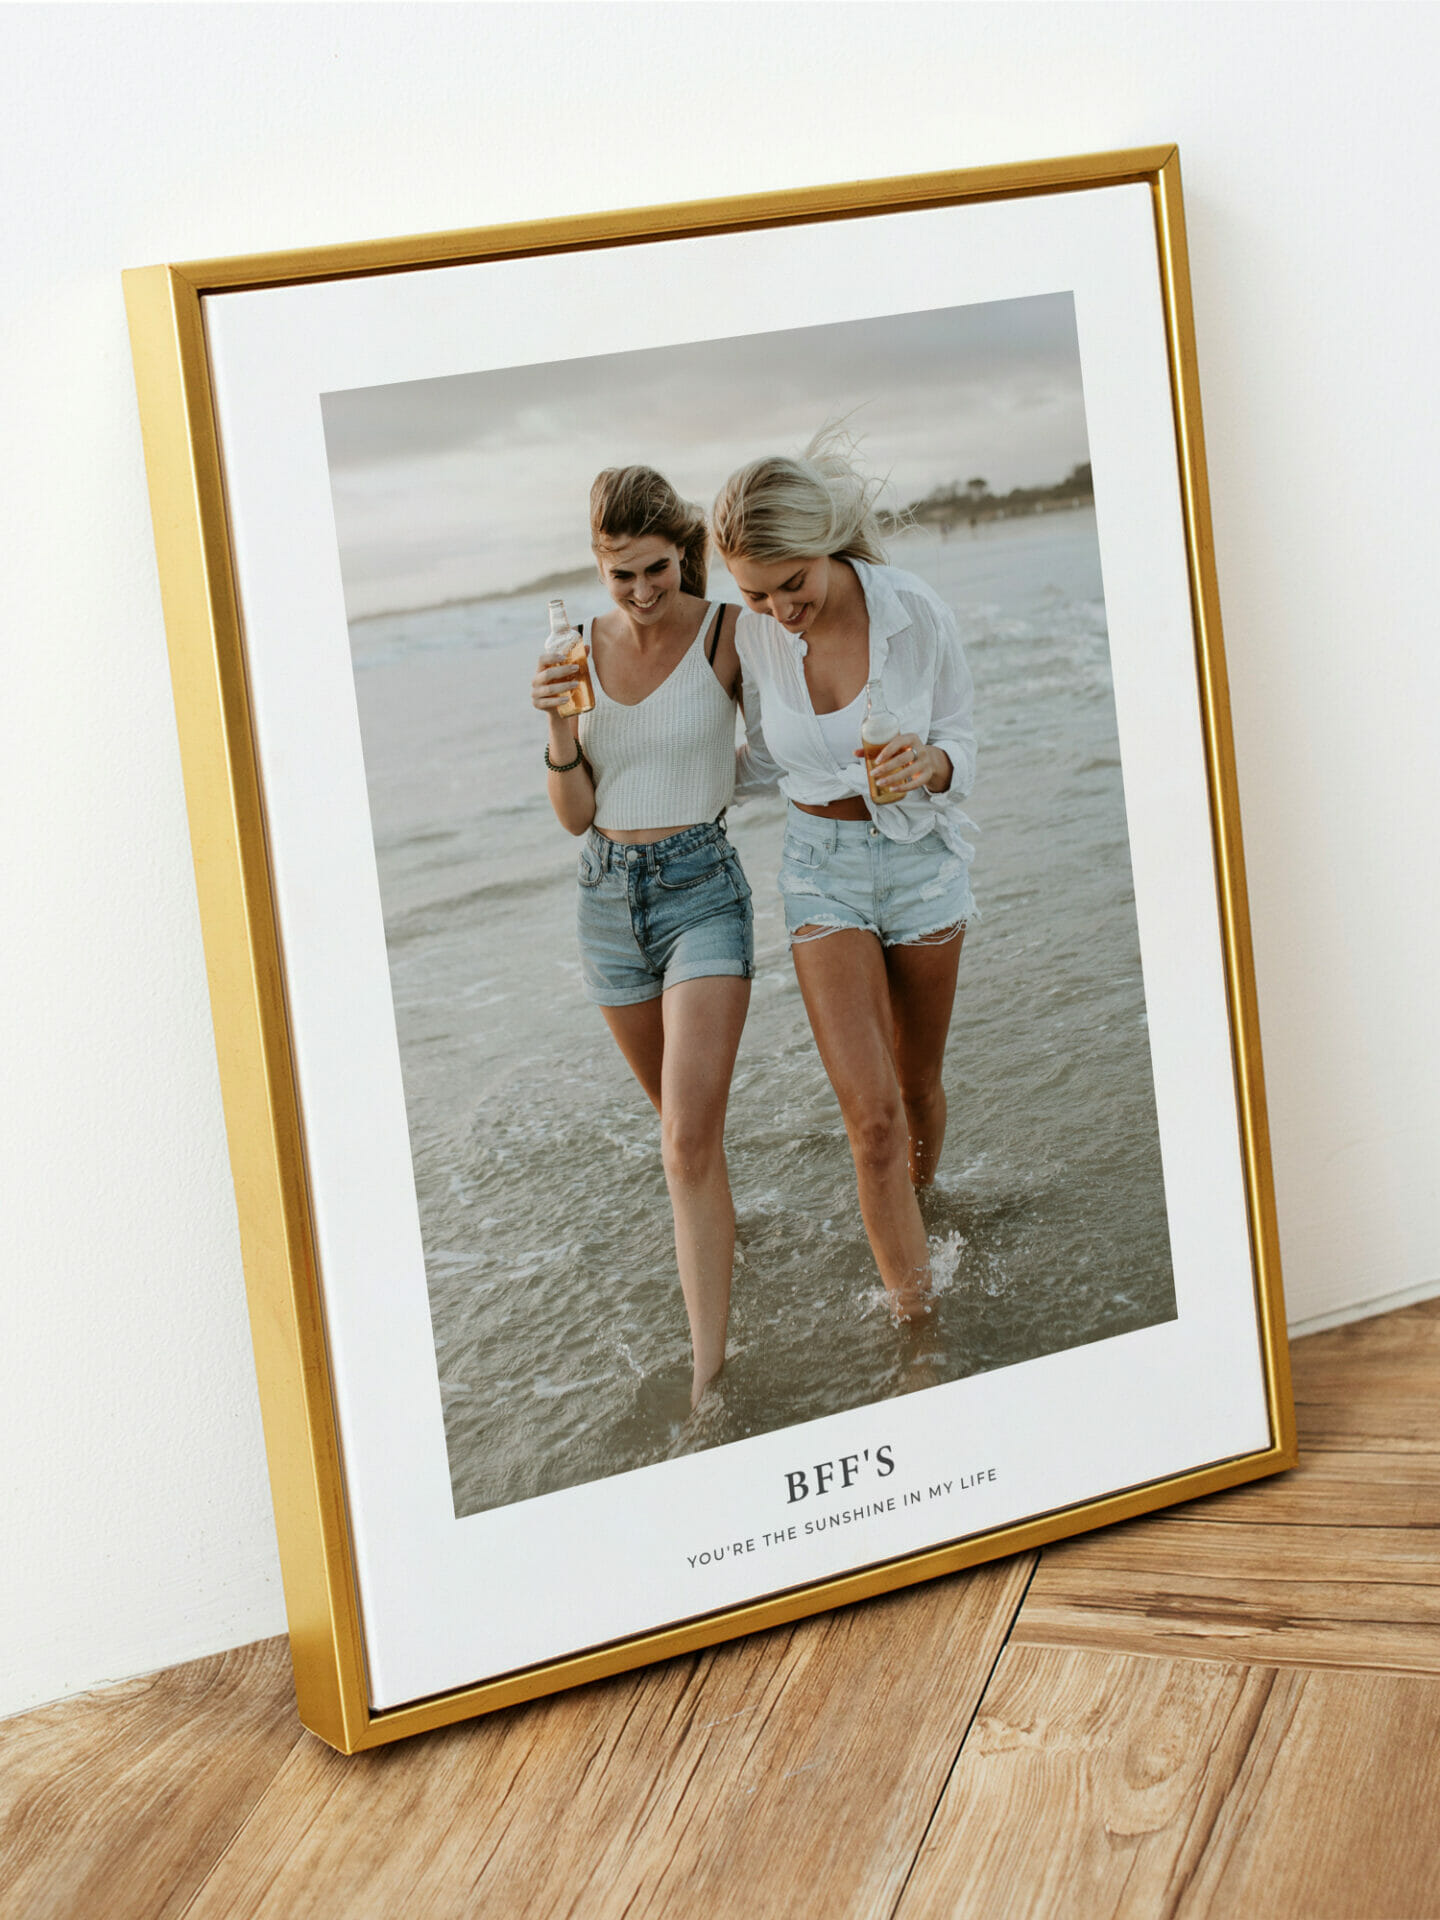 Interior with frames posters showing two best friends walking on the beach together